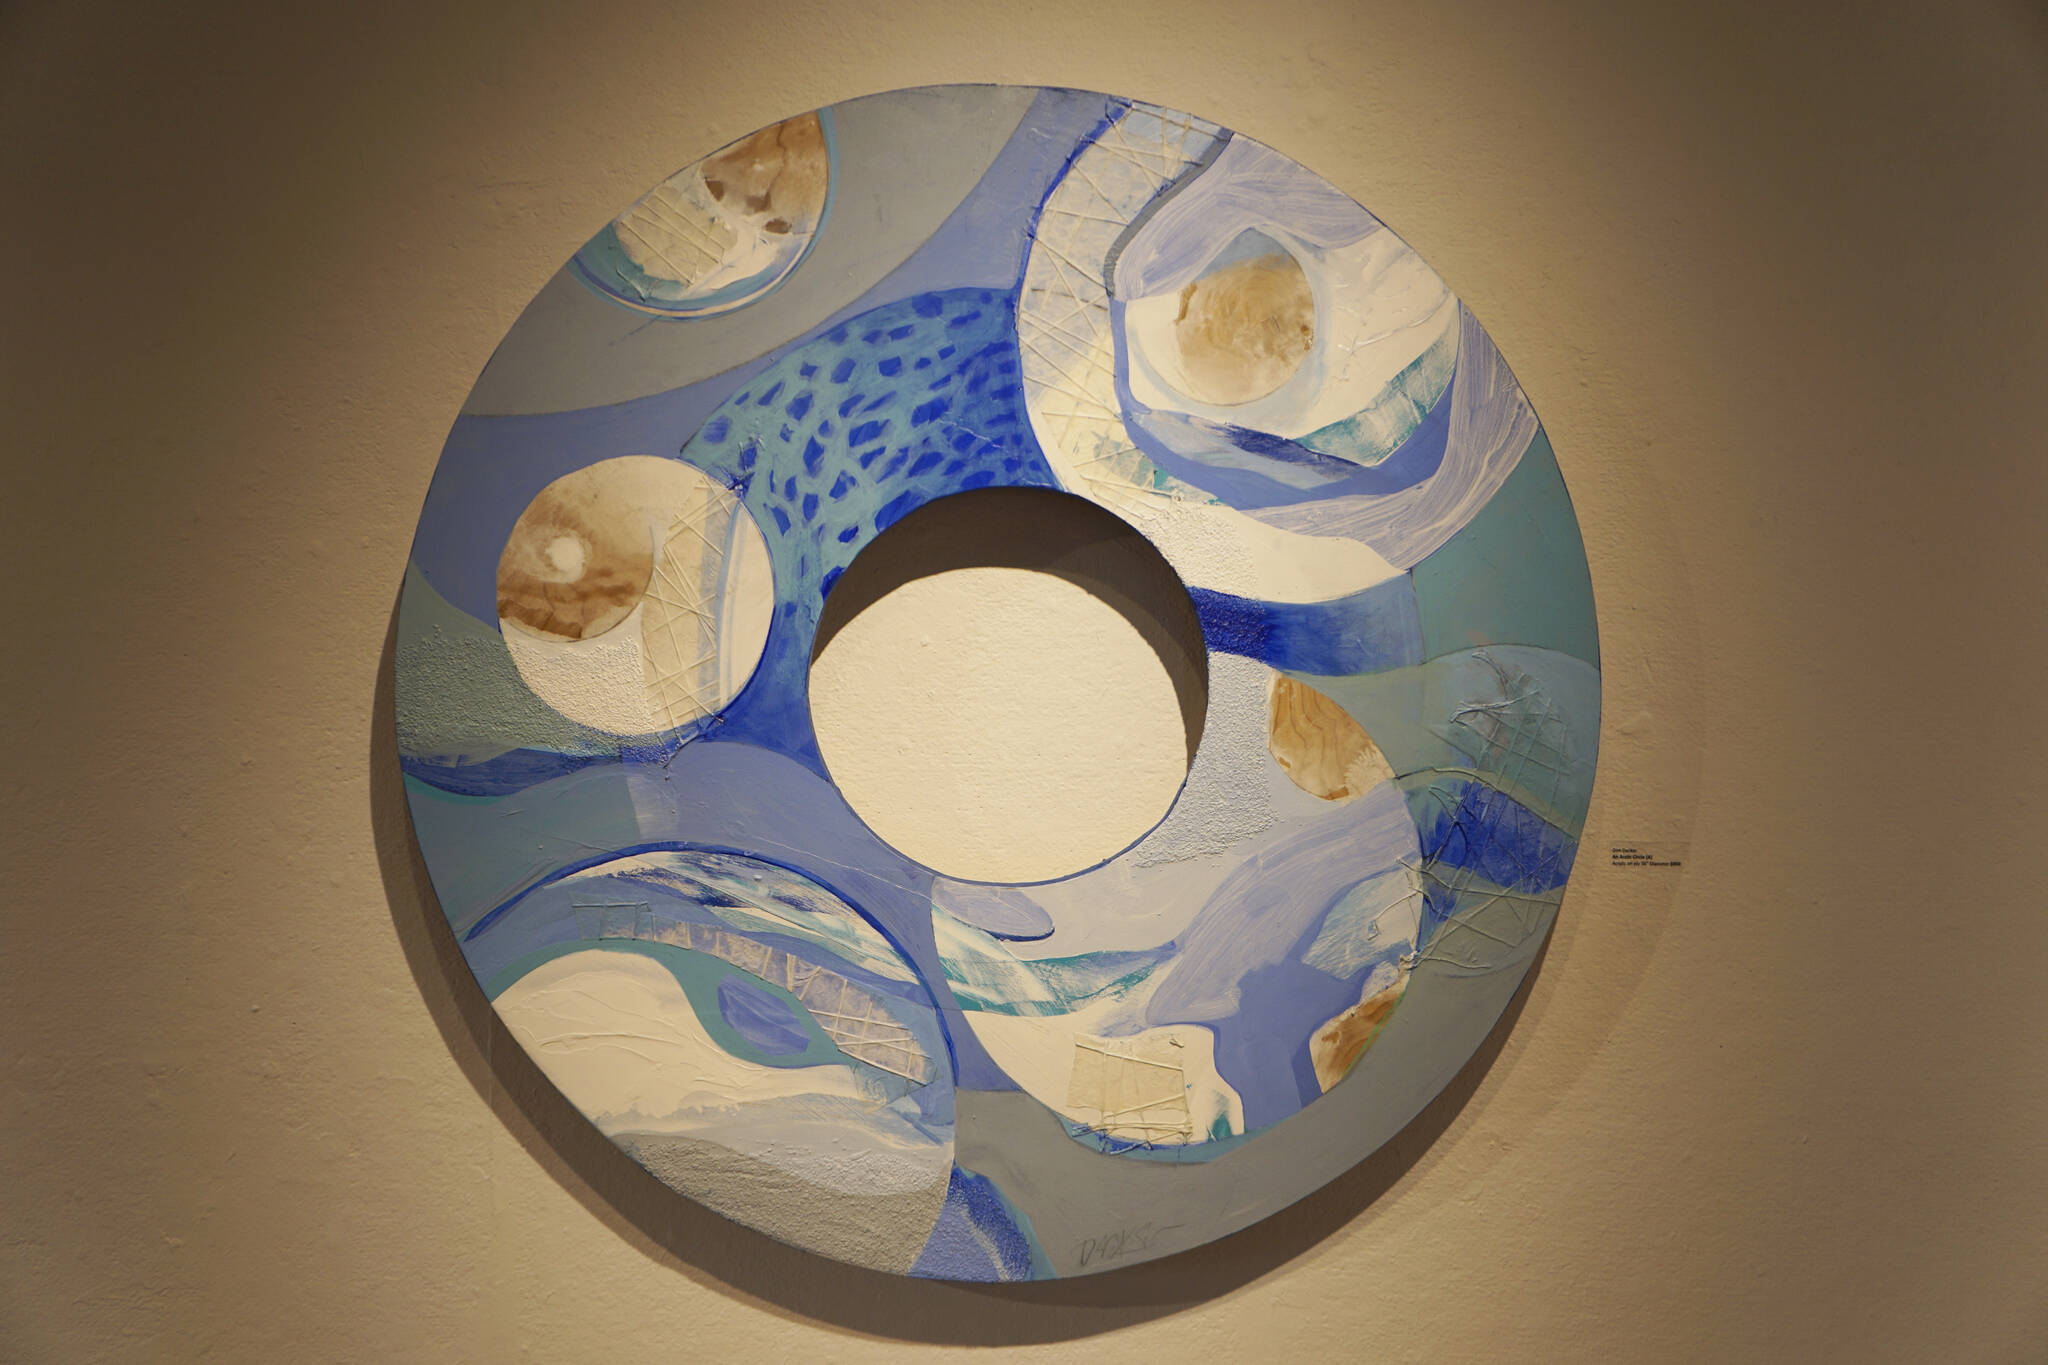 Don Decker’s “An Arctic Circle: A,” one of his works in his exhibit, Thin Ice, showing through February at Bunnell Street Arts Center in Homer, Alaska. (Photo by Michael Armstrong/Homer News)